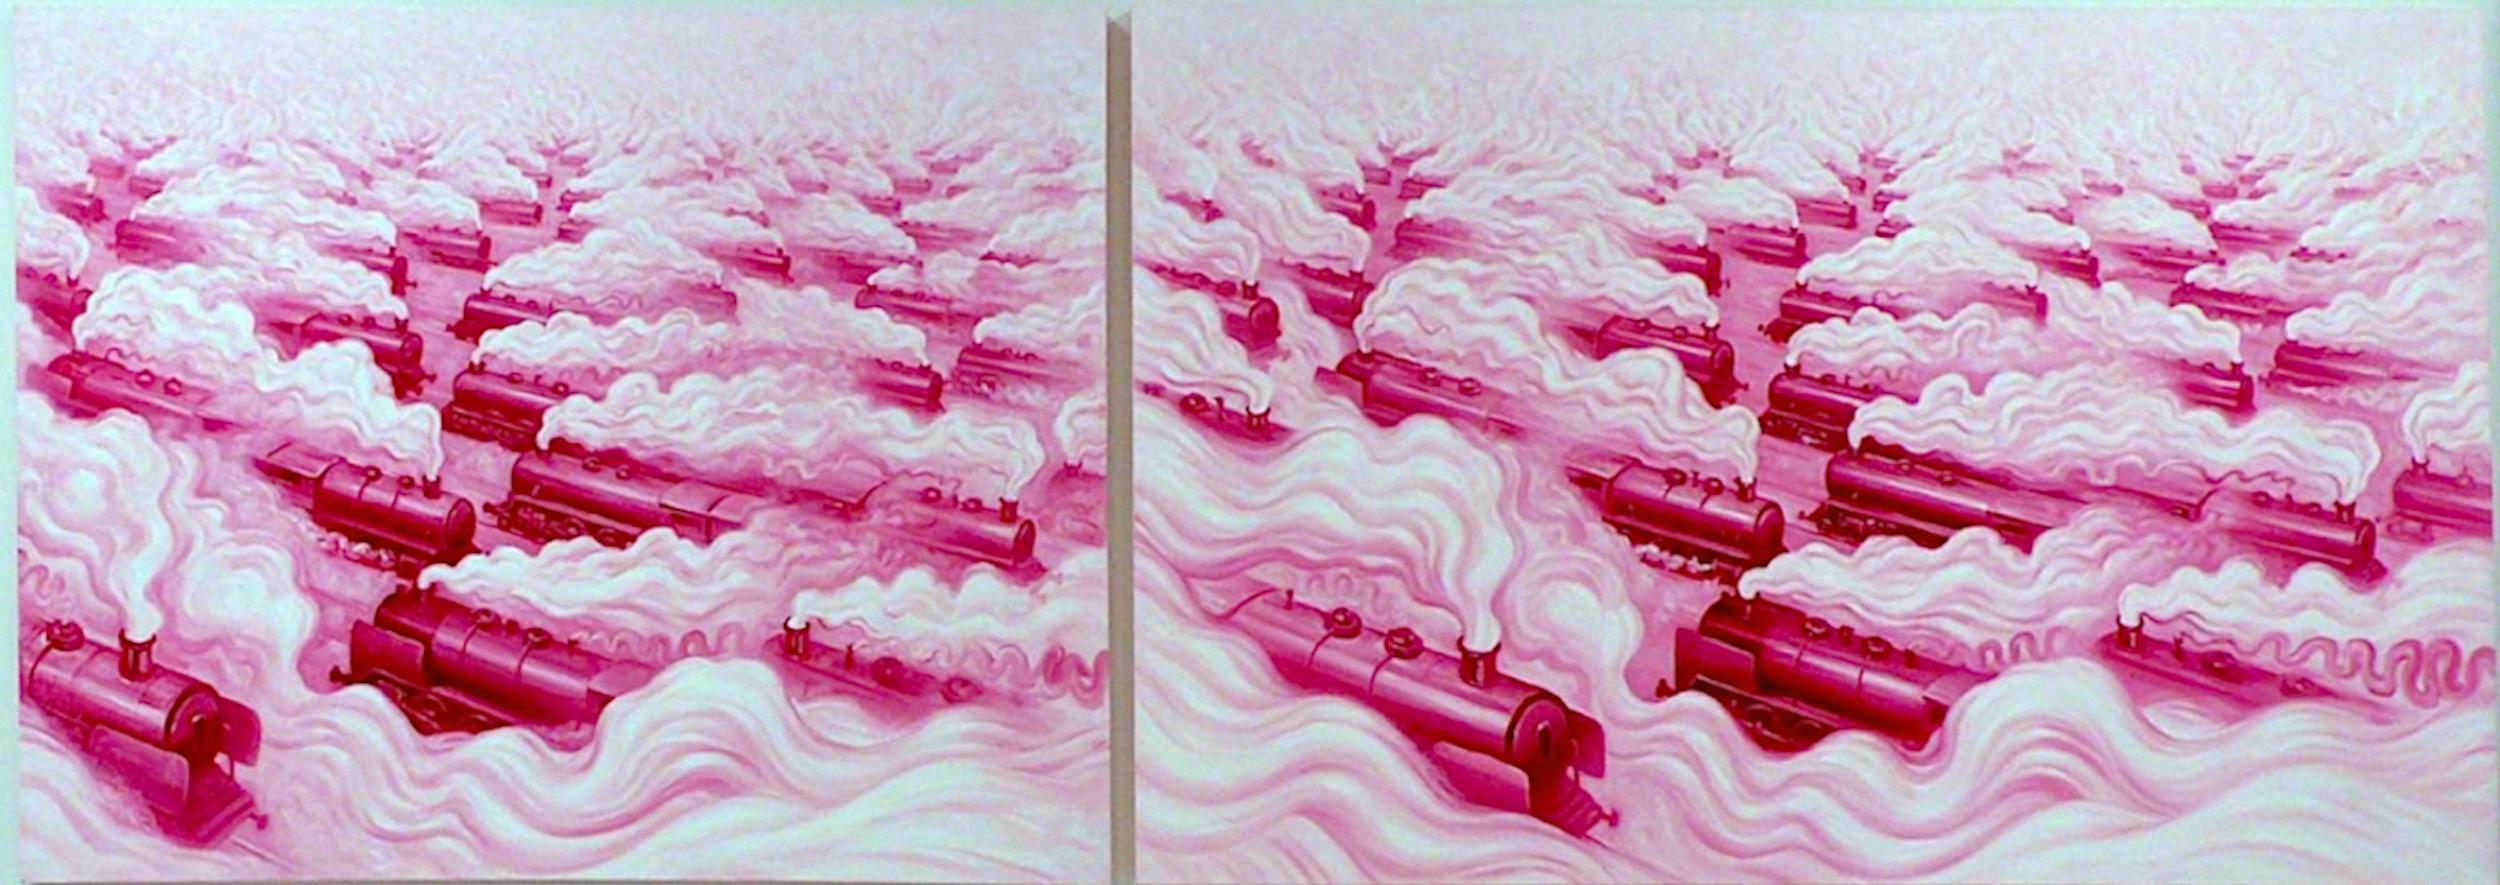 
This work is comprised of Two Paintings on canvas (diptych). 

The project Pink Freud and the Pleasant Horizon stems from Andre von Morisse’s interest in the powerful influence of Freud, Darwin, and Christ on ideas about psychological, scientific